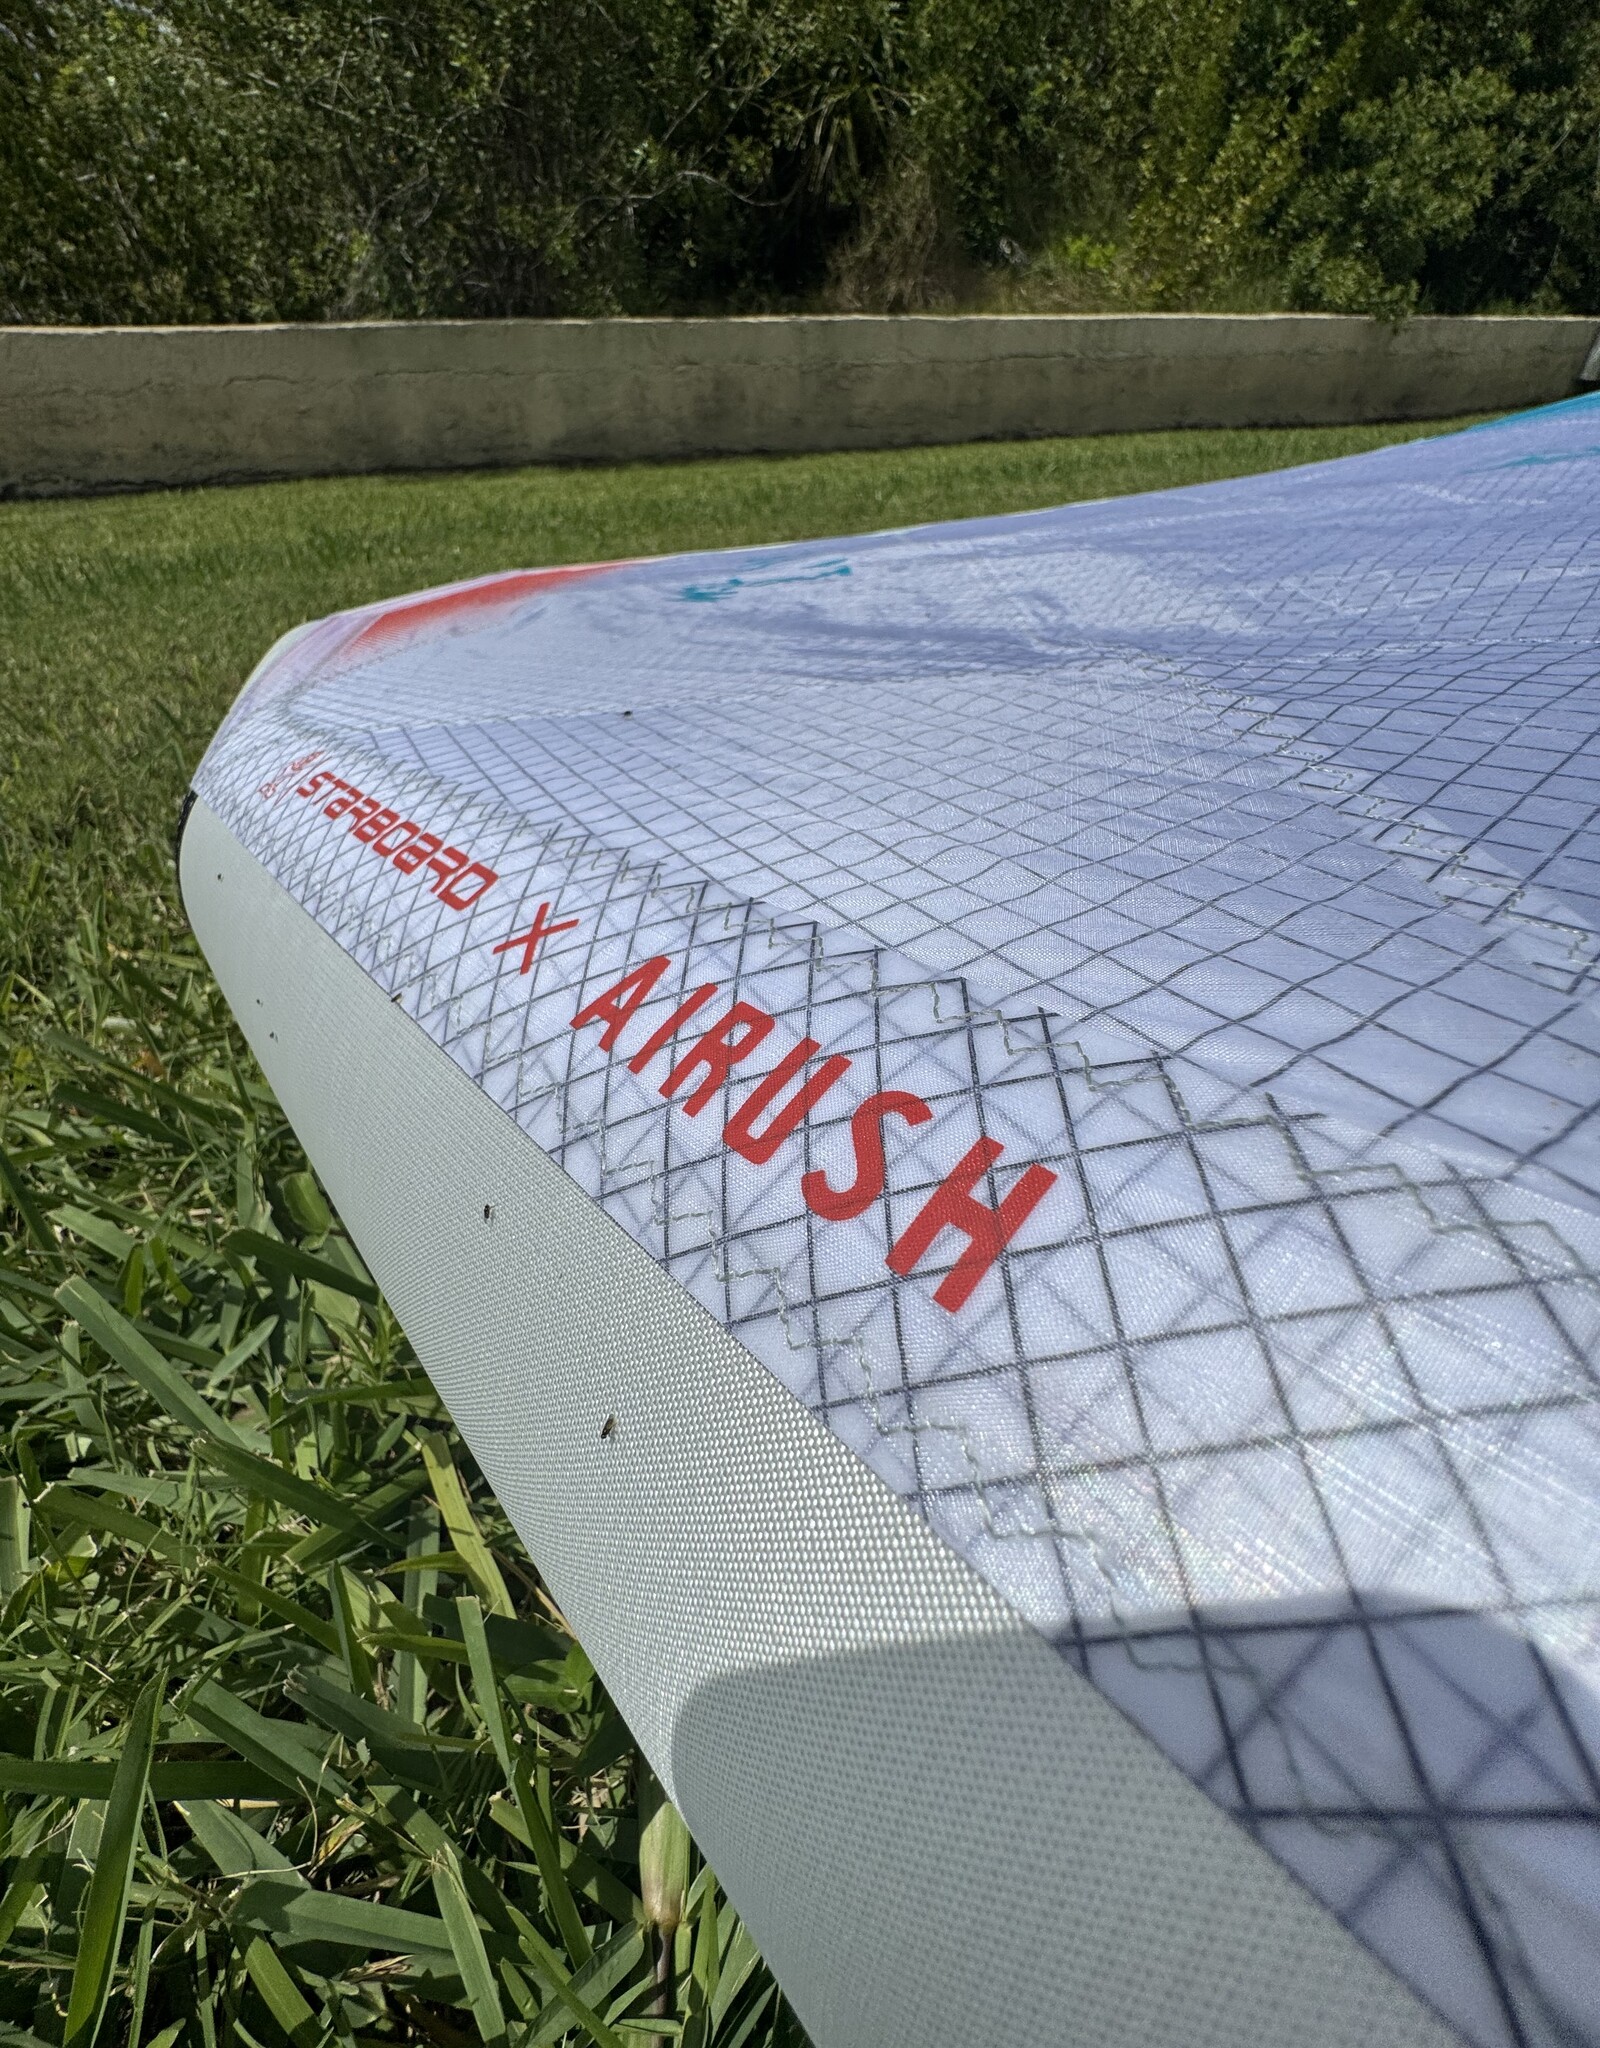 FREEWING FREEWING AIR TEAM 5M ULTRA X CANOPY AND HO'OKIPA AIRFRAME